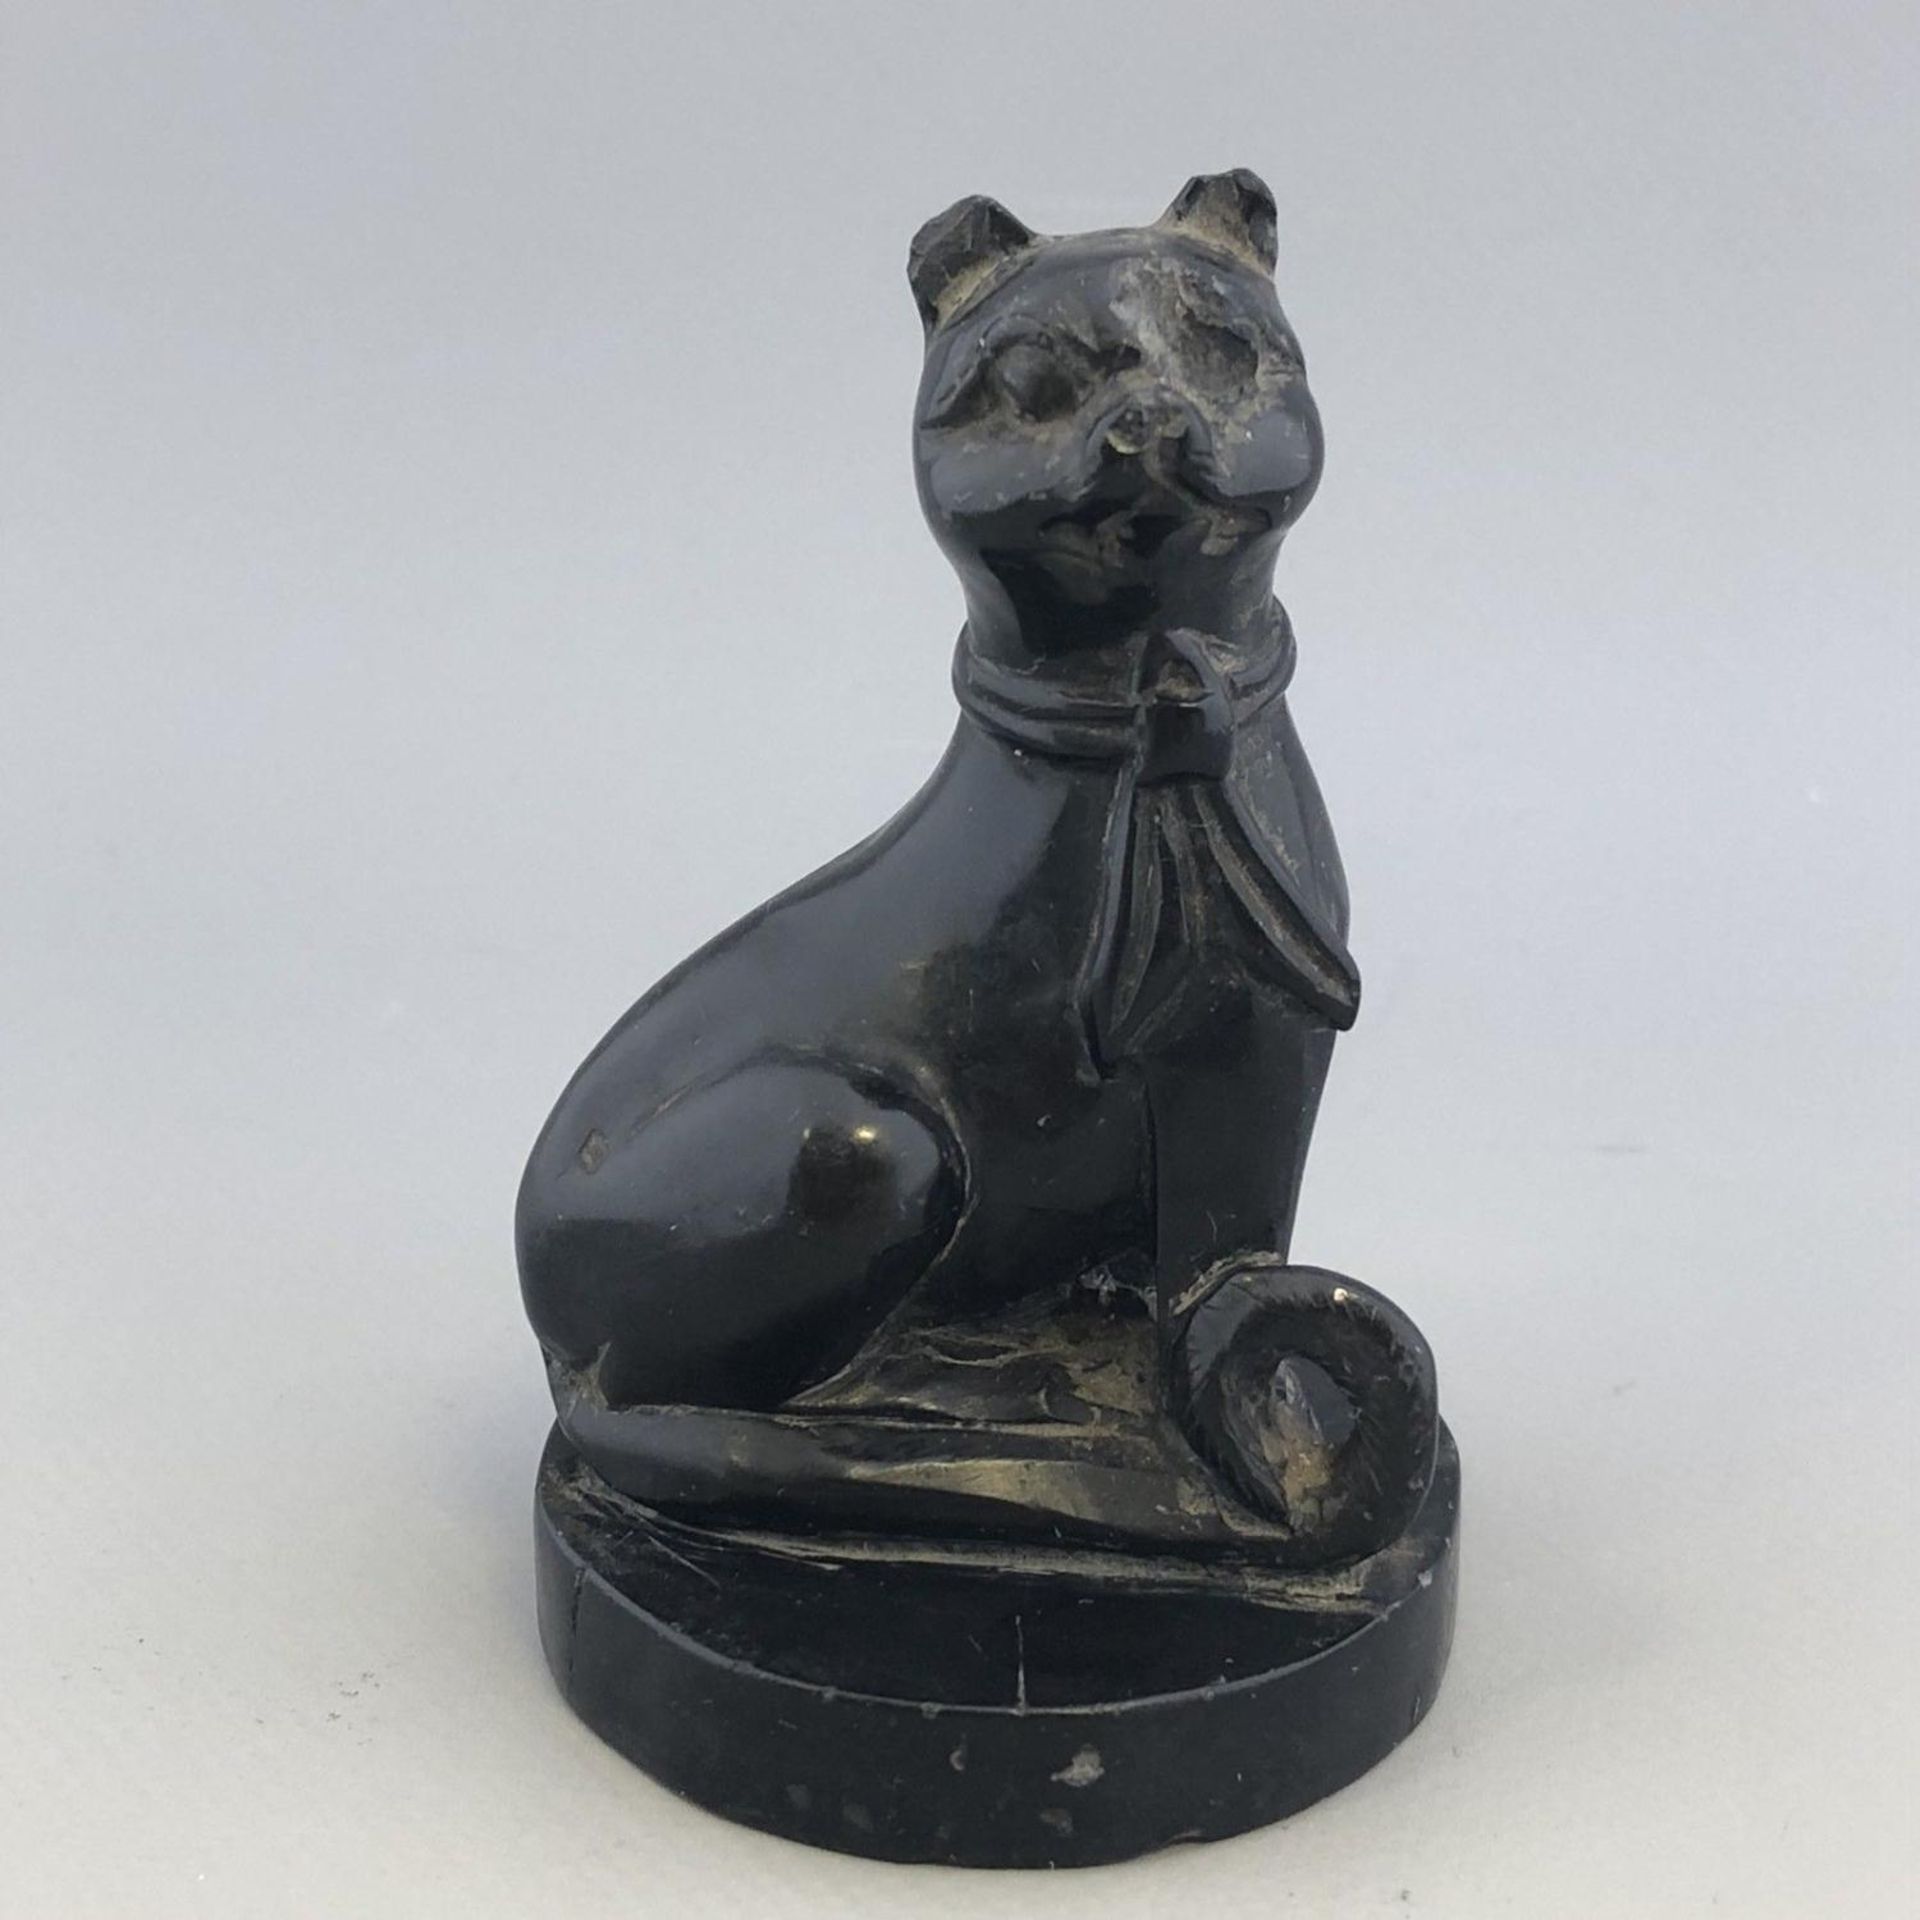 Interesting Antique carved hardstone stone figure of a lucky black cat - Japan?